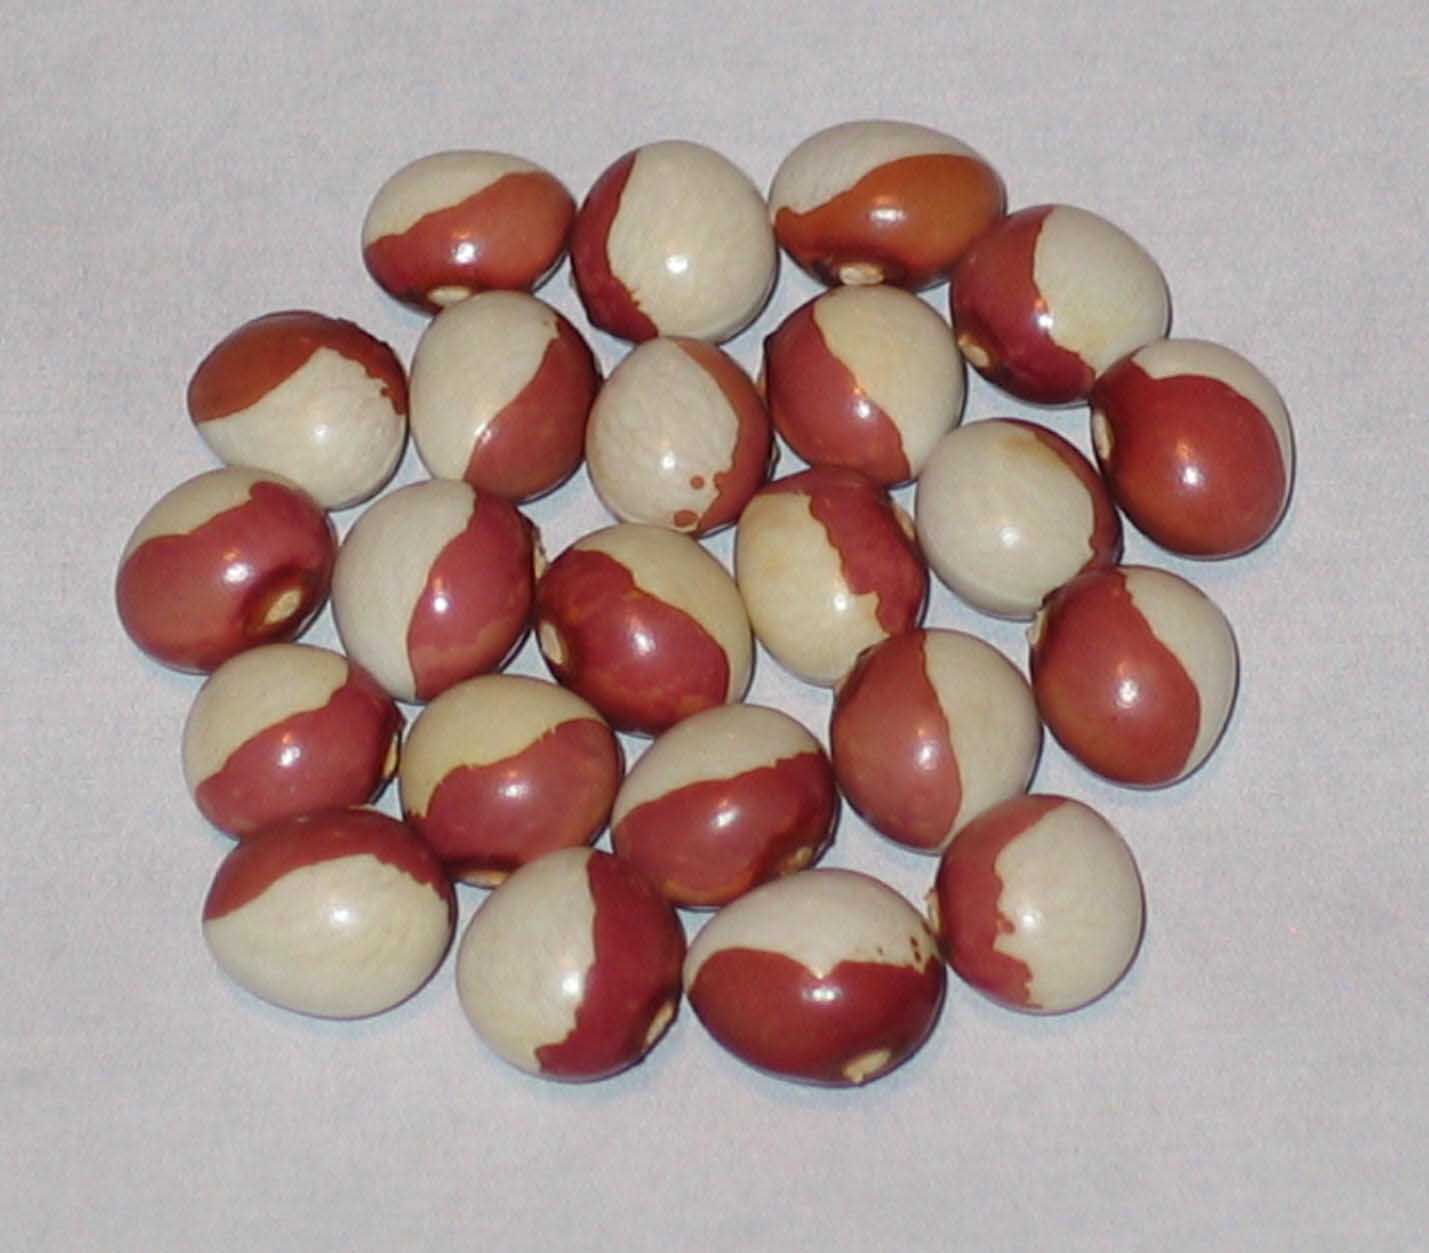 image of Tunny beans